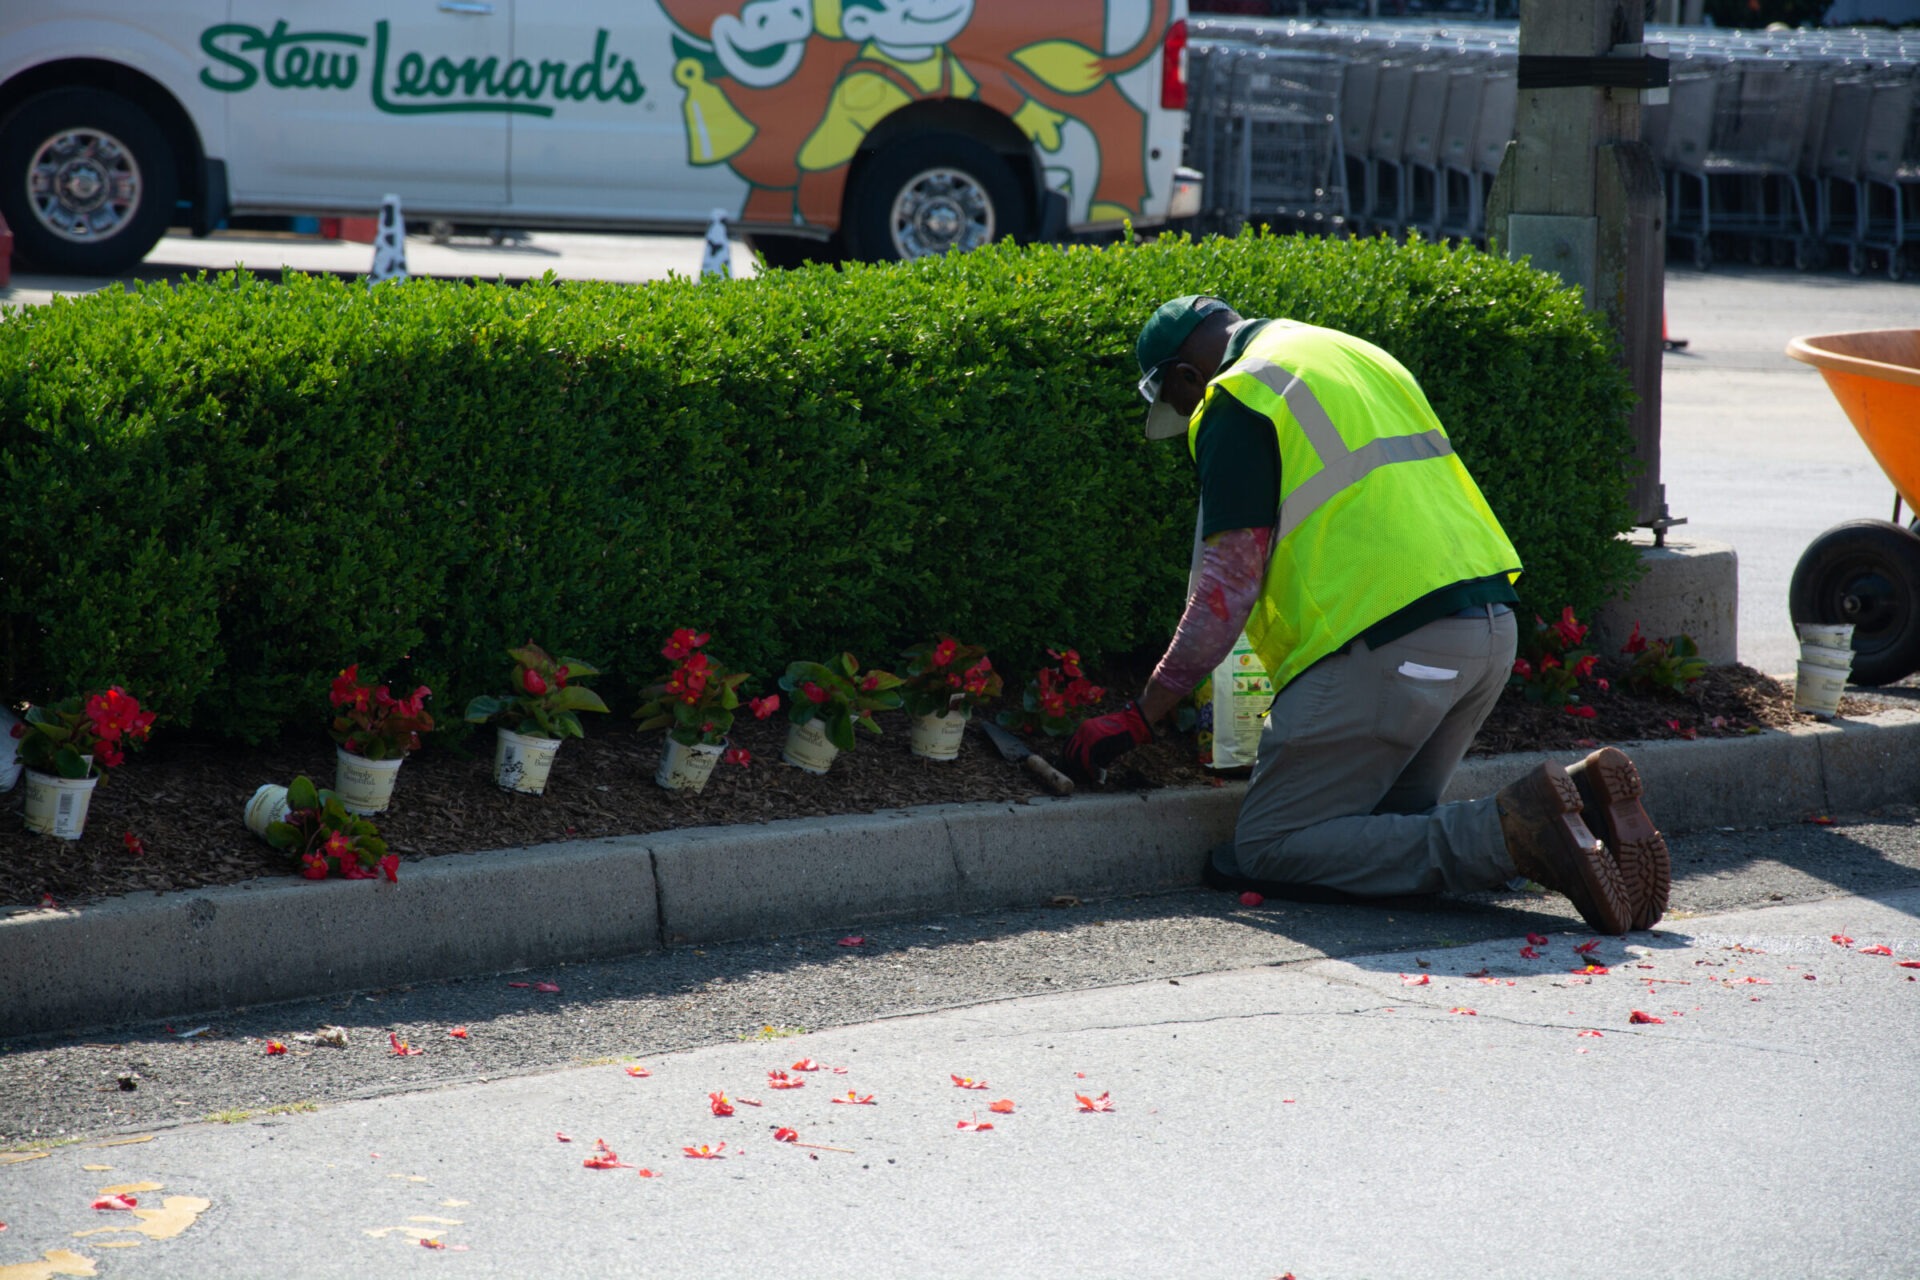 A person wearing a reflective vest and a cap is kneeling to plant red flowers by a hedge. A Stew Leonard's van is in the background.